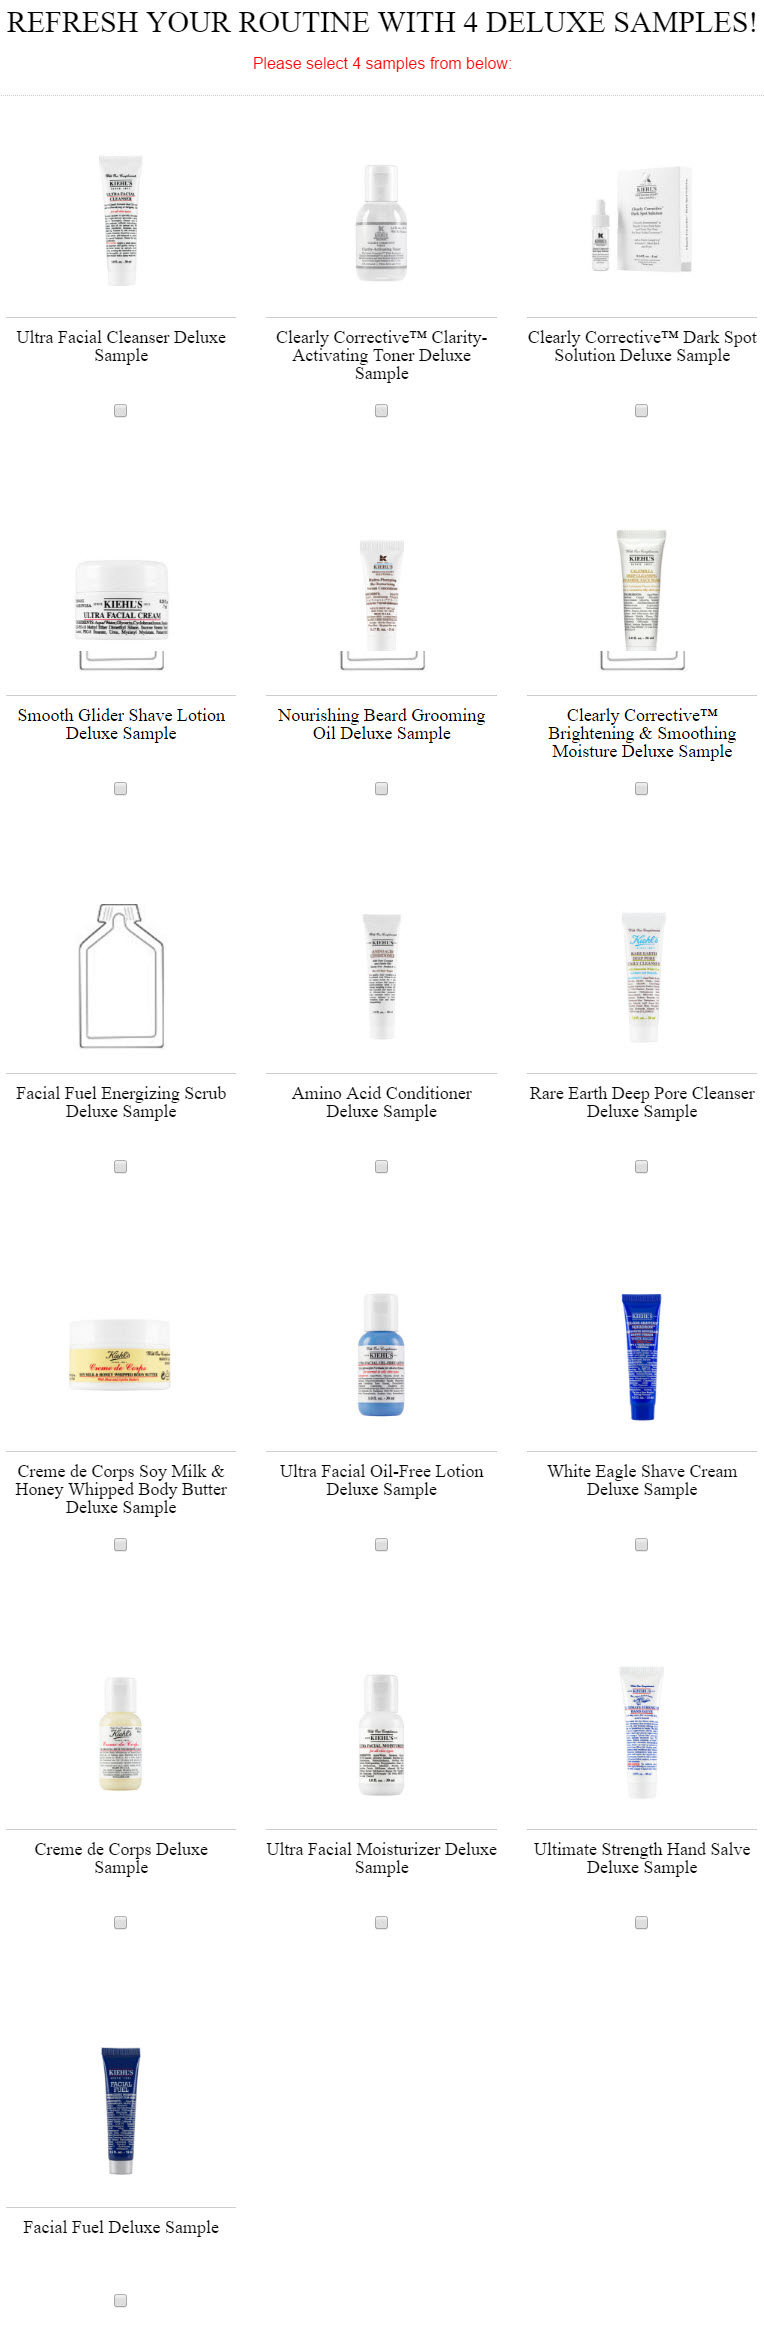 Receive your choice of 4-piece bonus gift with your $85 Kiehl's purchase